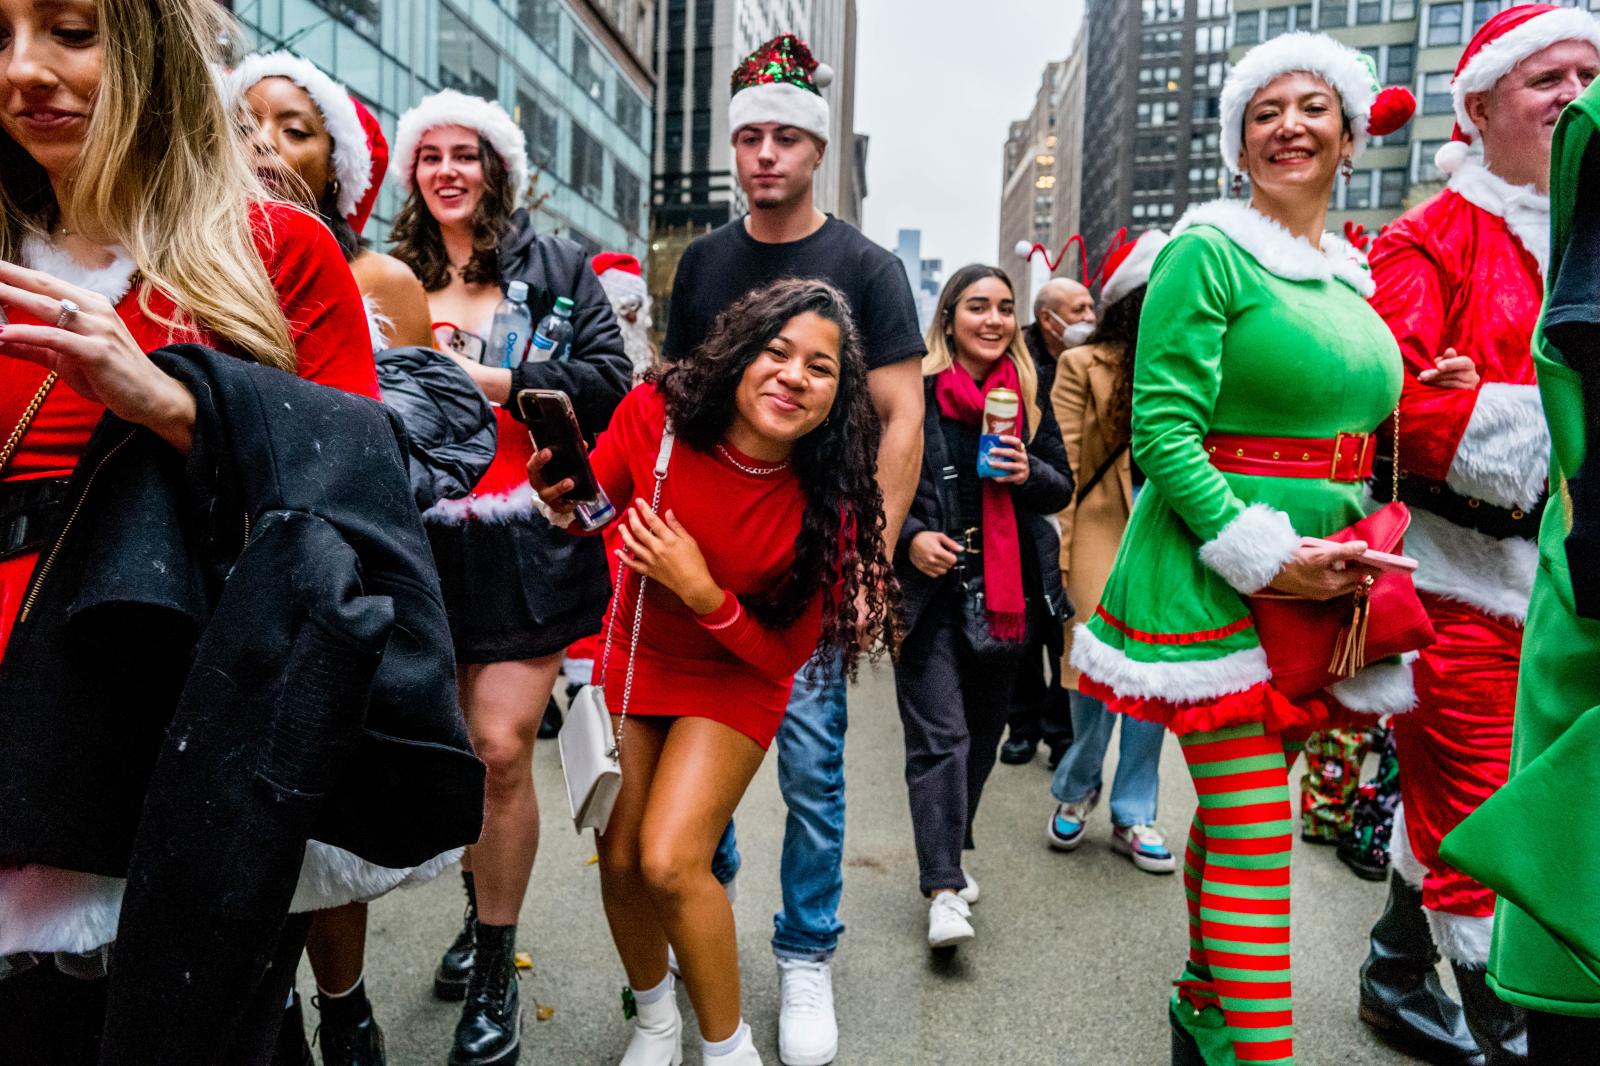 Image from Pandemic Effects -  After one-year hiatus, SantaCon NYC is back...